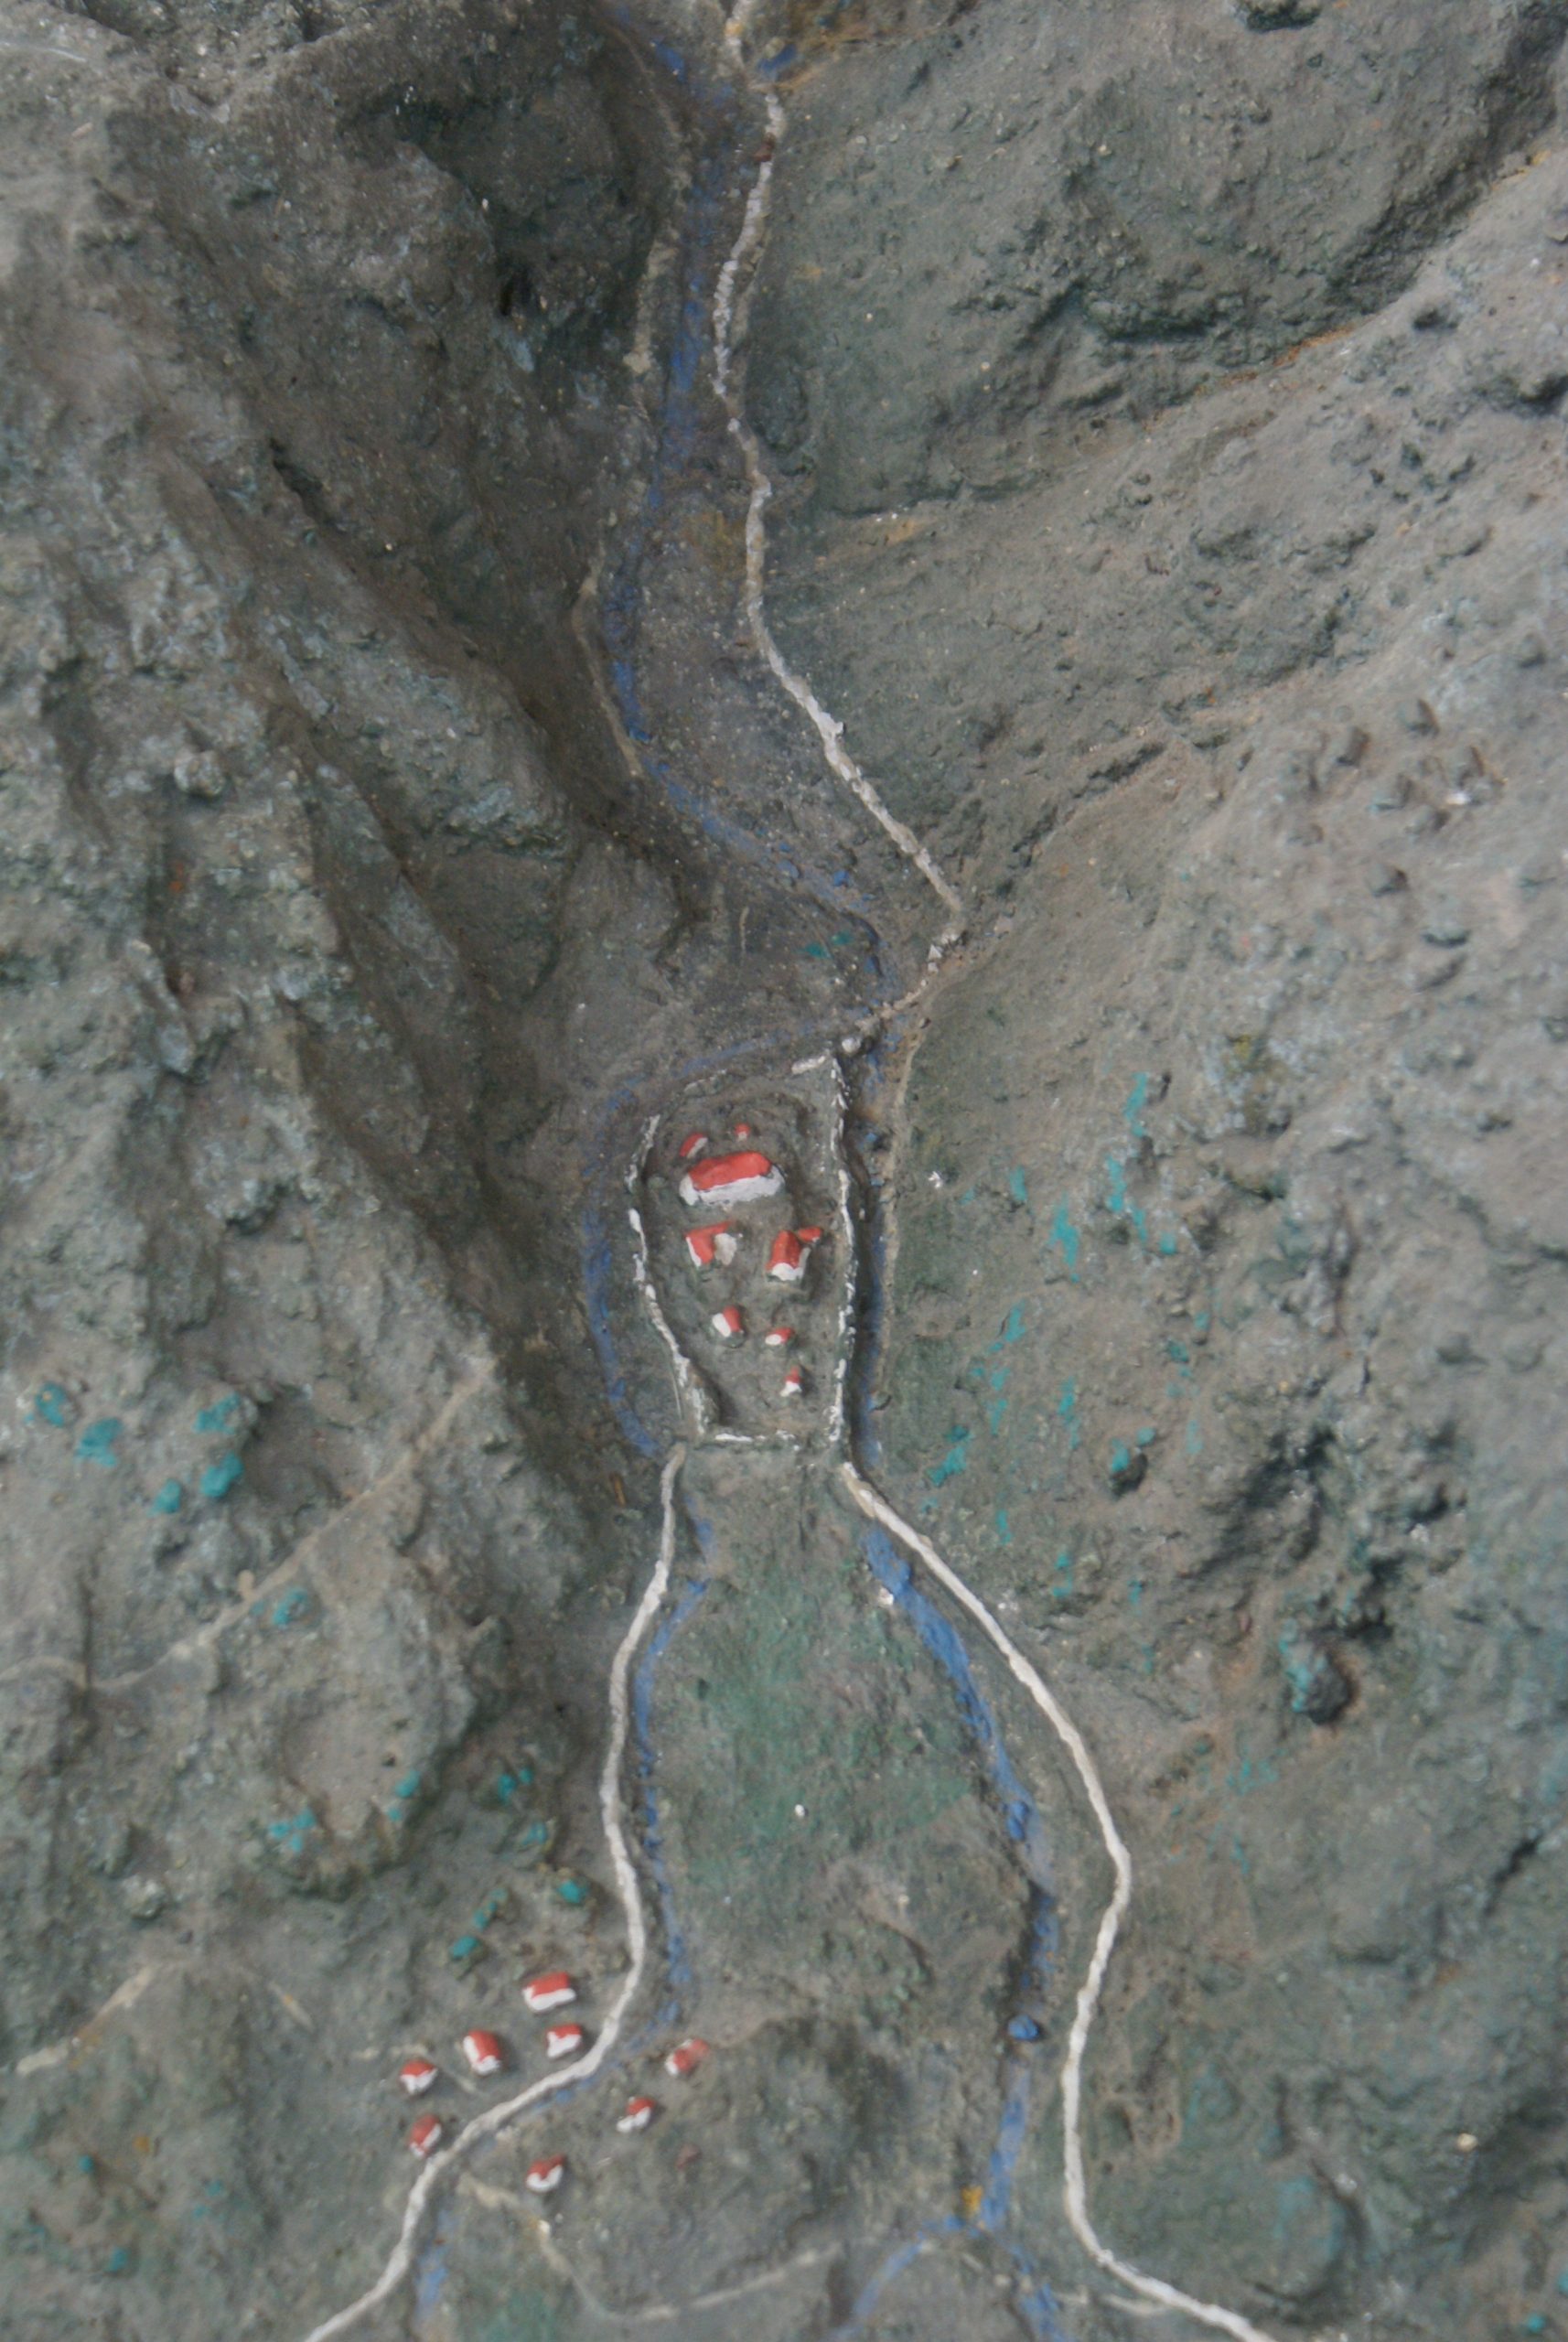 Monastery of Peć as 3D Object on the Relief Map